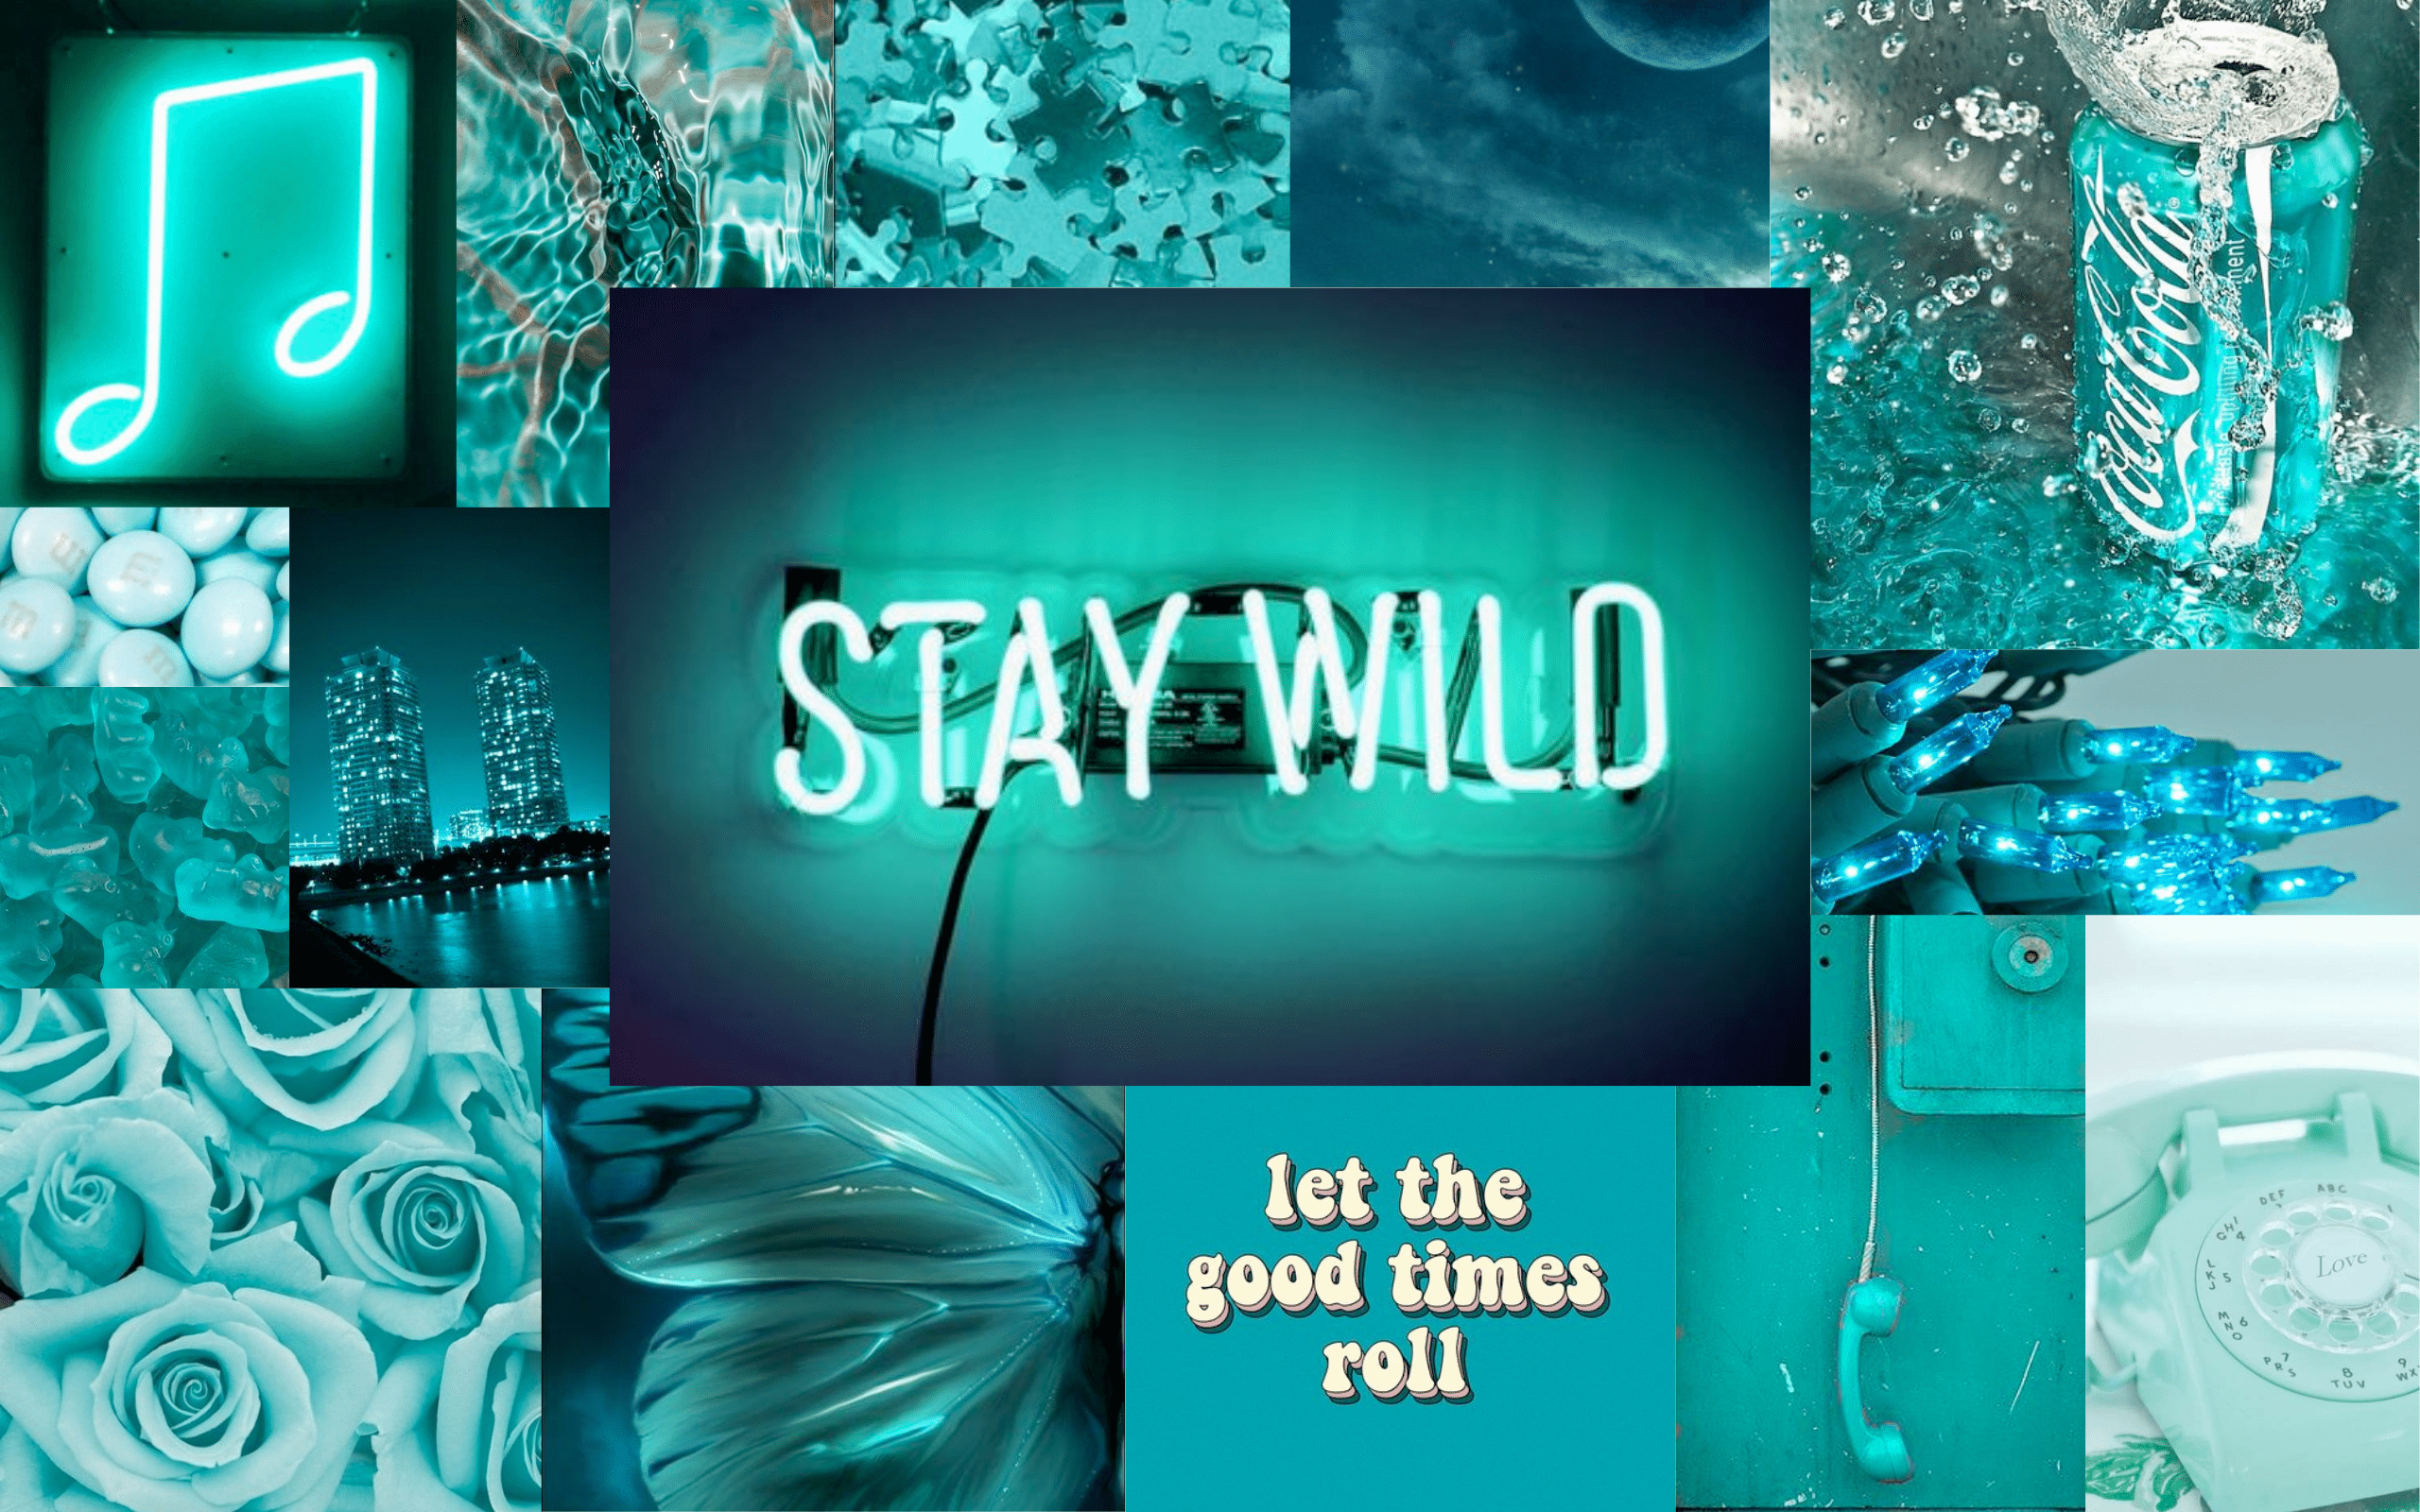 A collage of teal aesthetic images including roses, neon signs, and jellyfish. - Teal